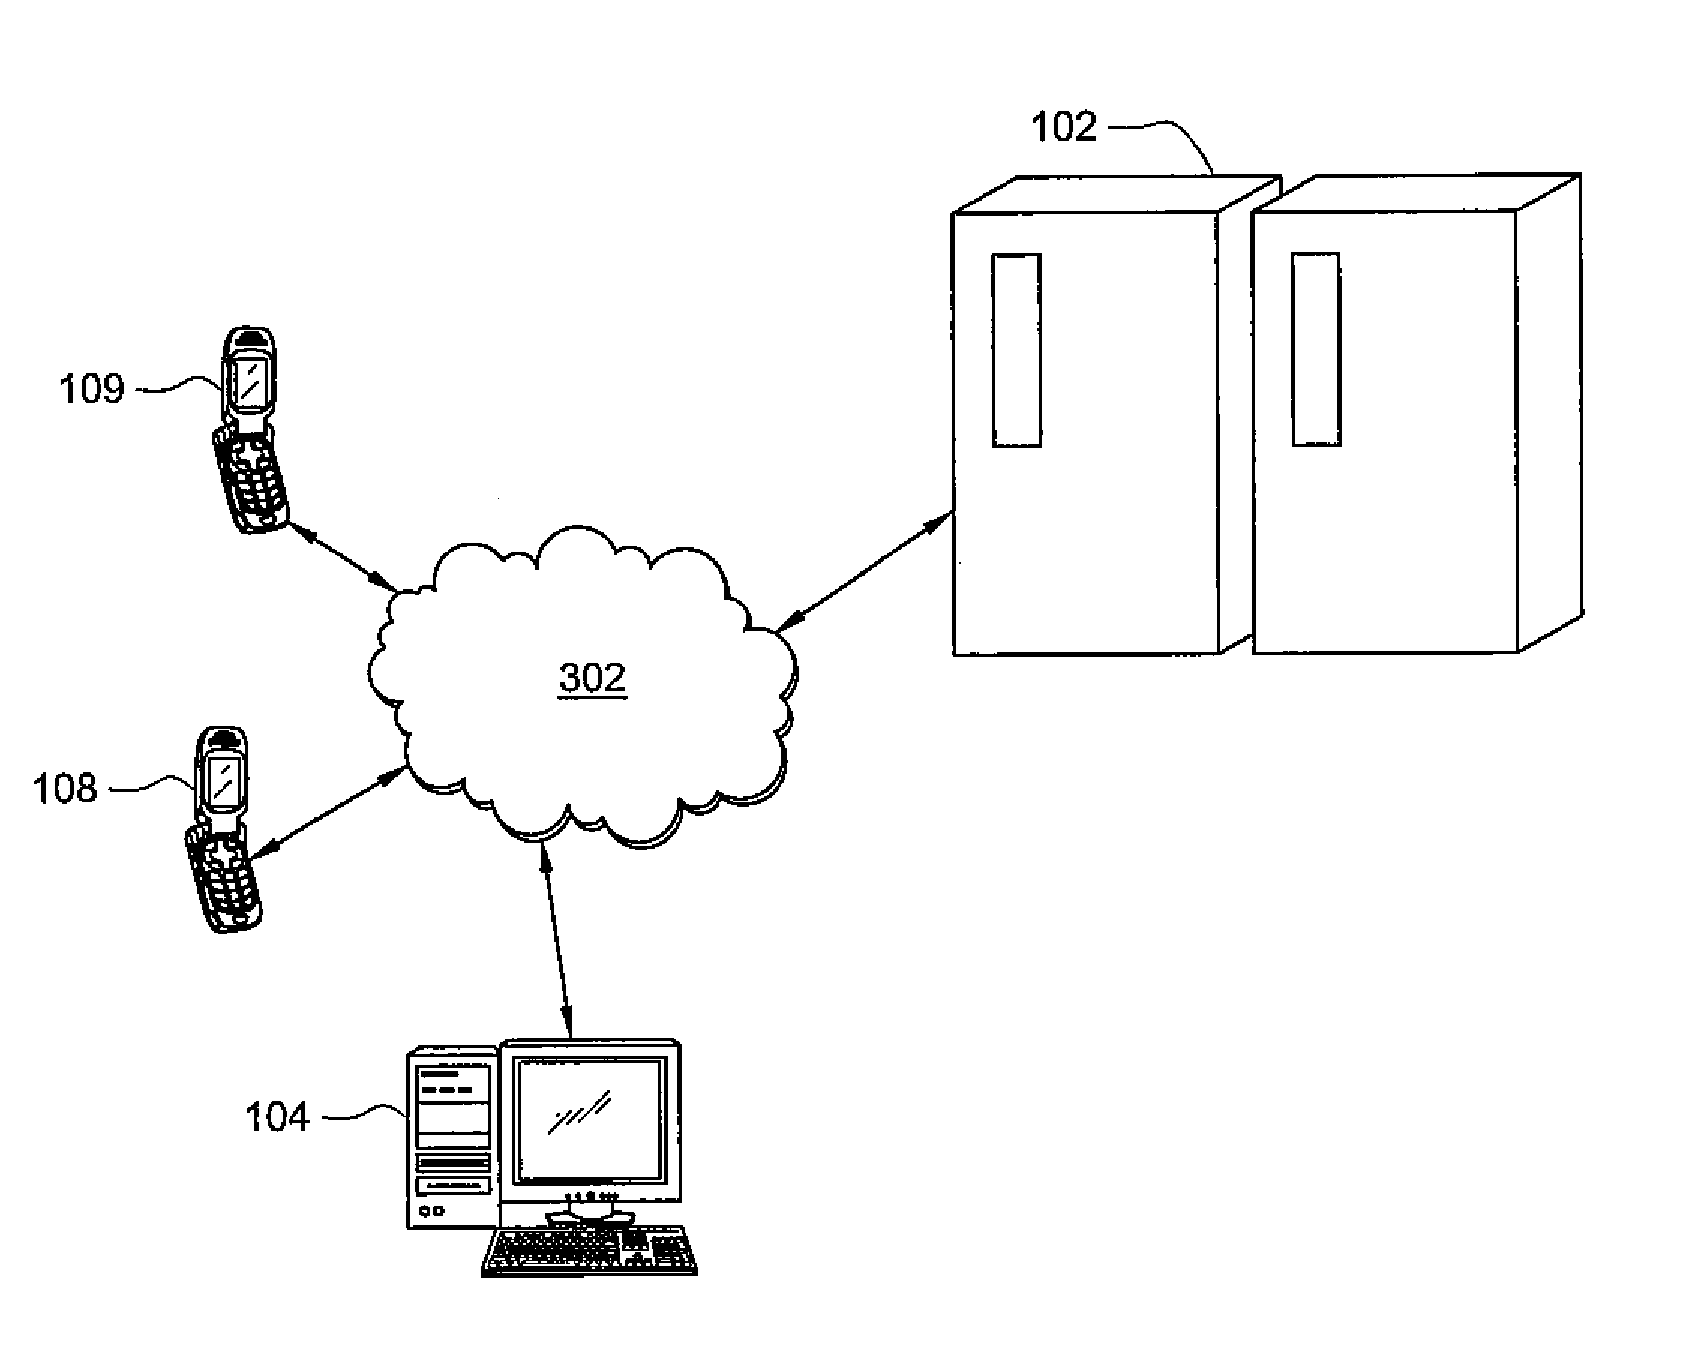 System and method for controlling inter-device media exchanges